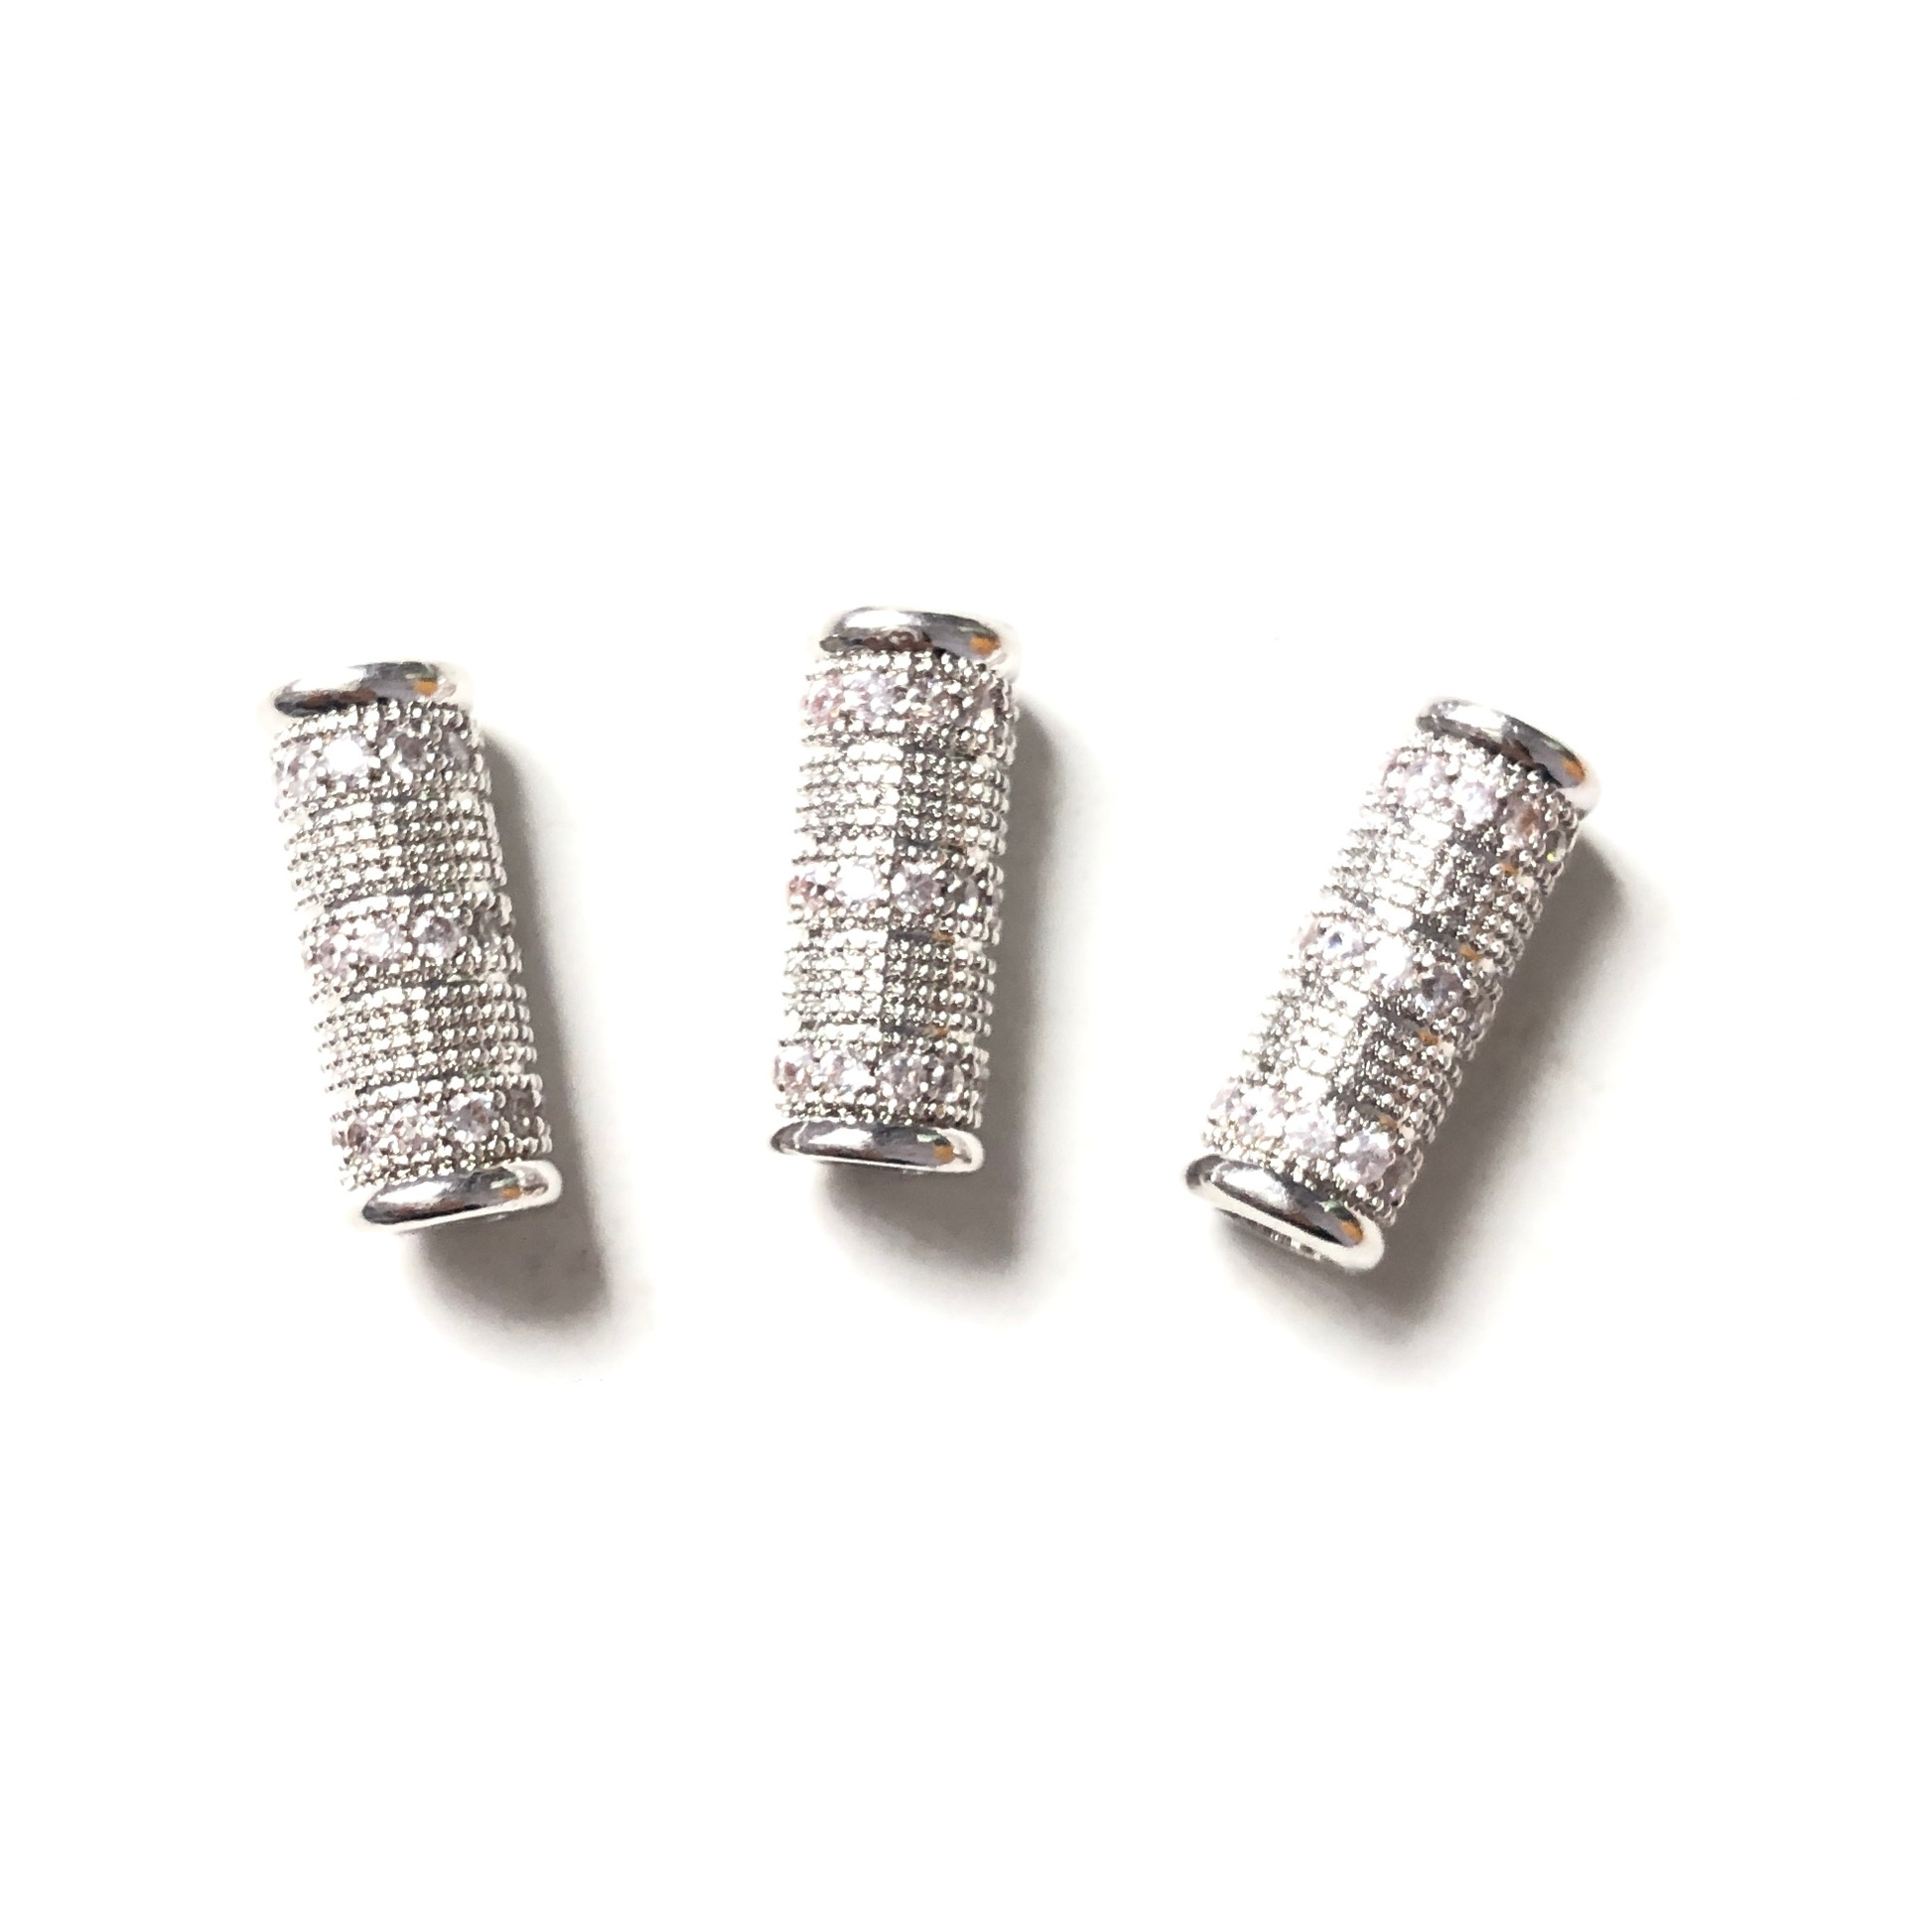 10pcs/lot 16*6mm CZ Paved Straight Tube Spacers Silver CZ Paved Spacers Tube Bar Centerpieces Charms Beads Beyond